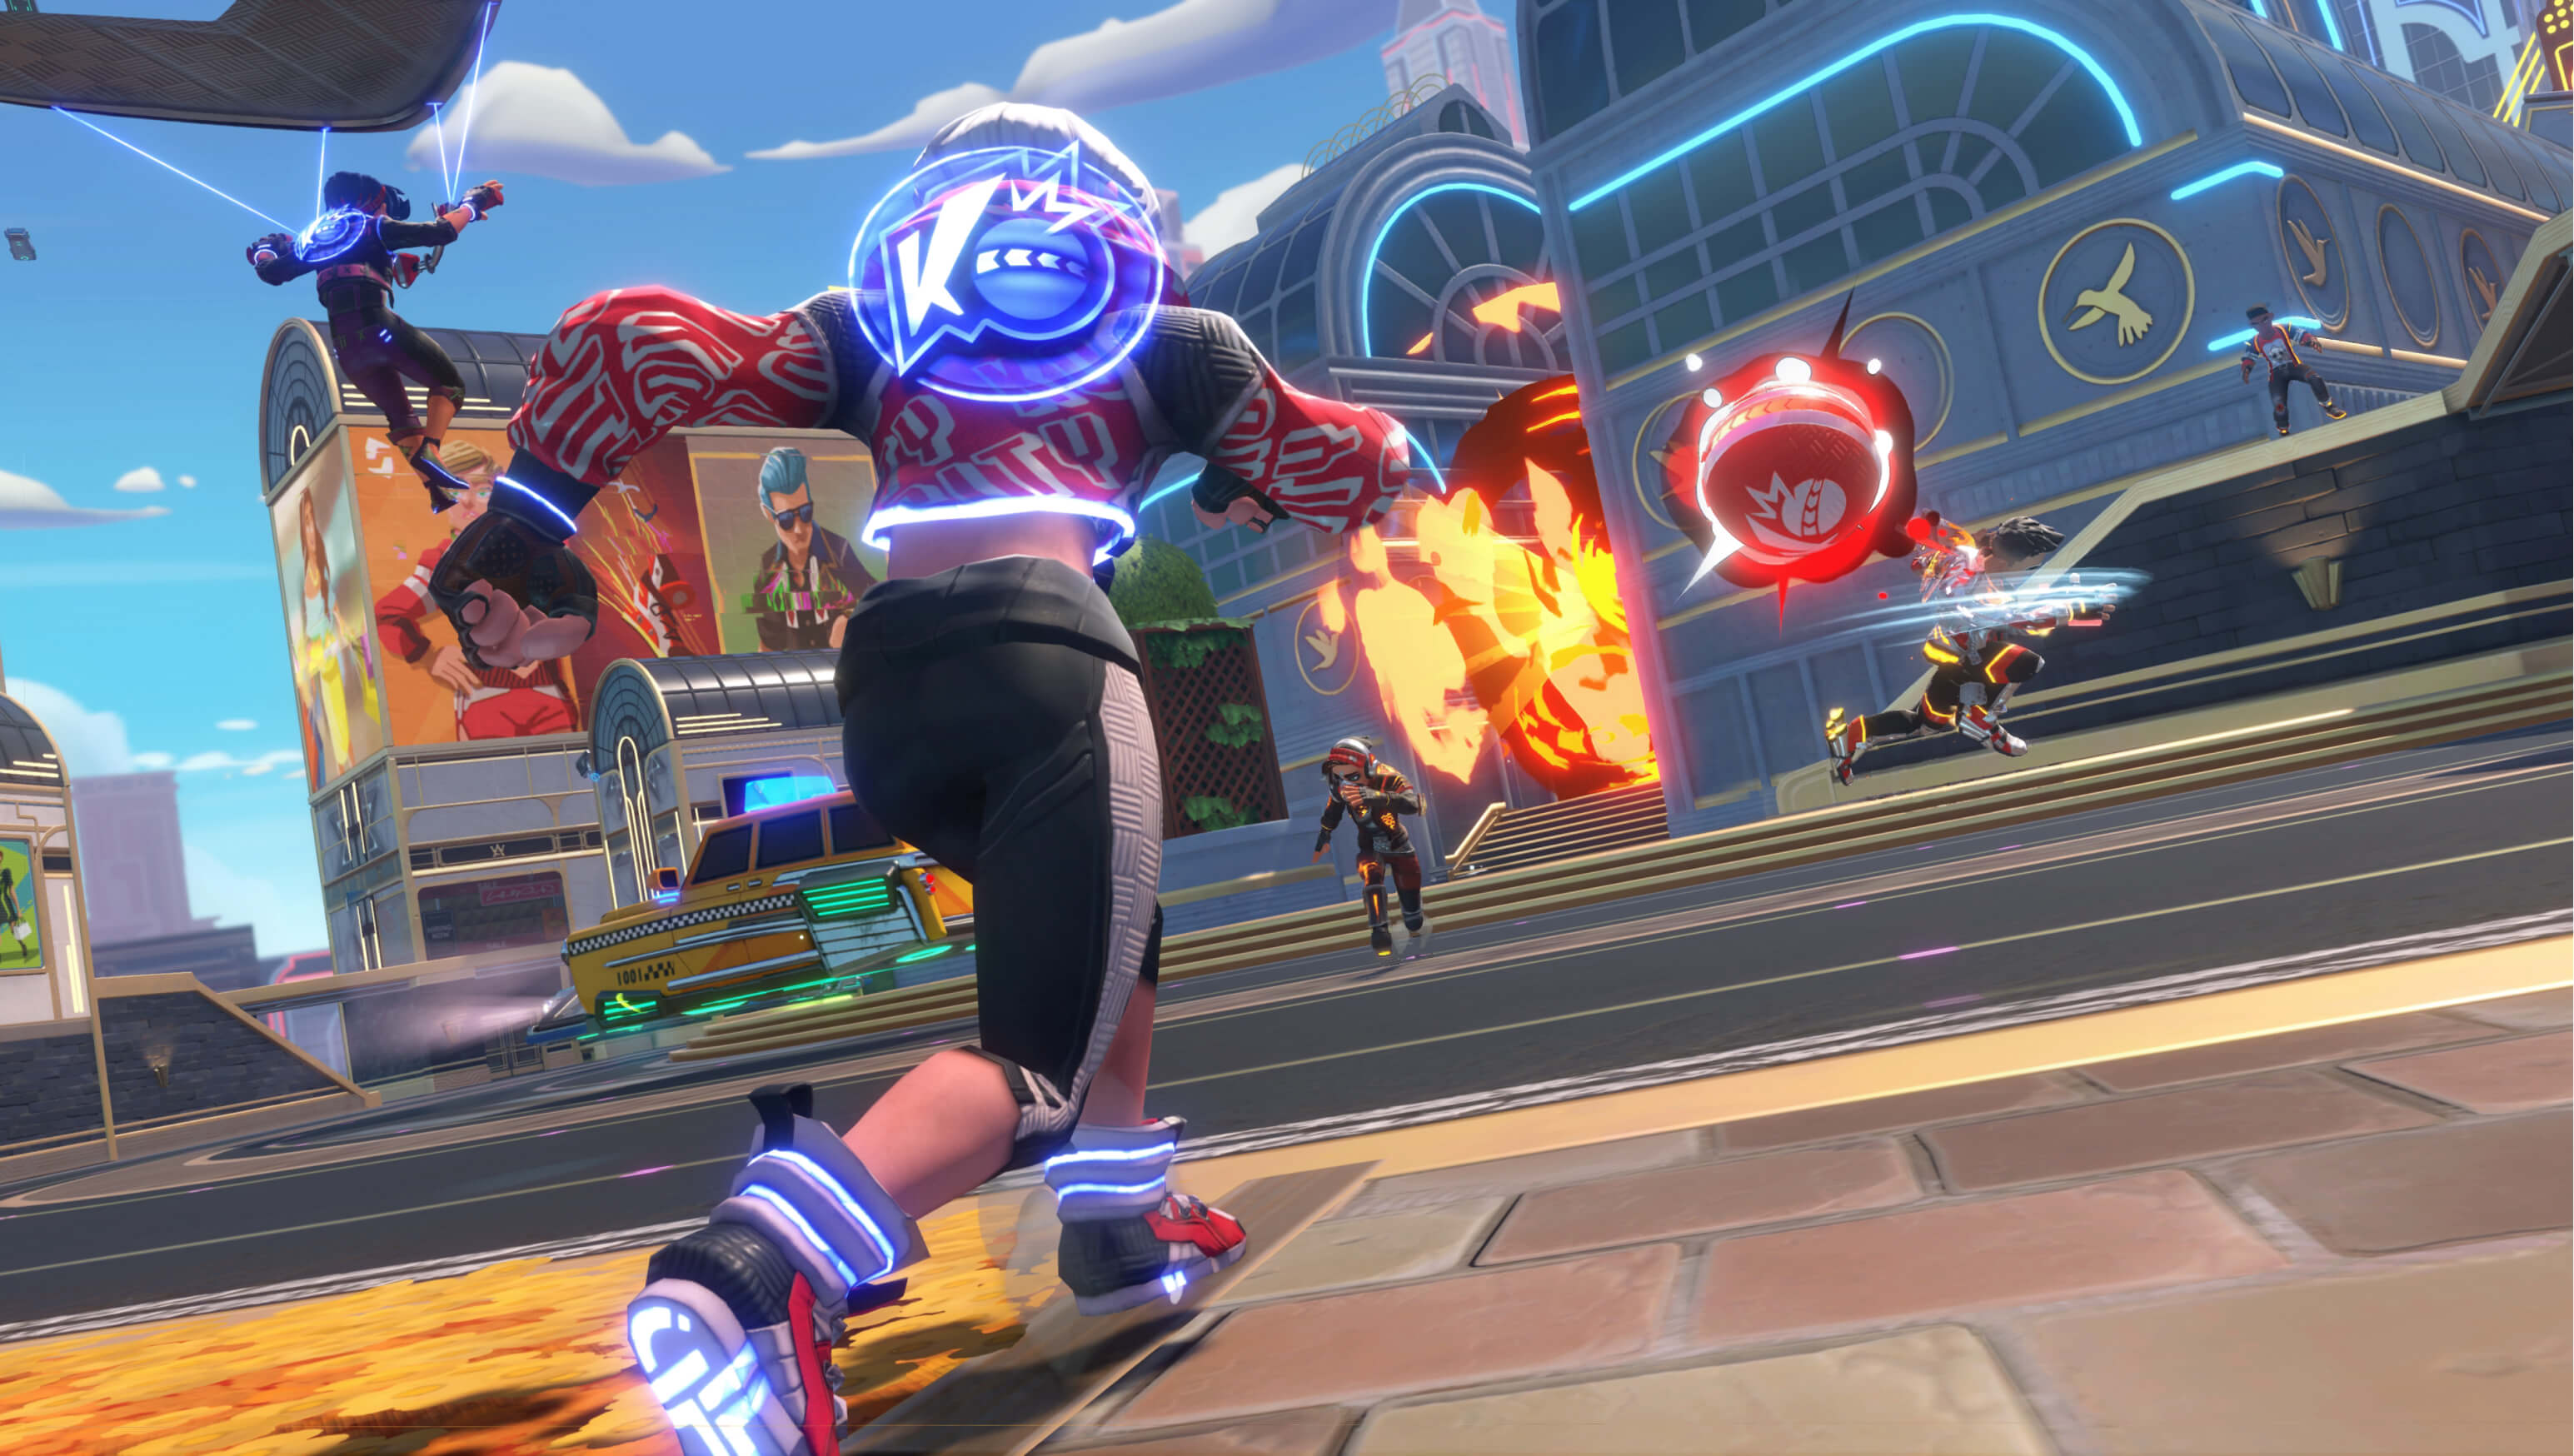 A screenshot of Knockout City, sowing a player throwing a dodgeball while other players run into the center of the arena